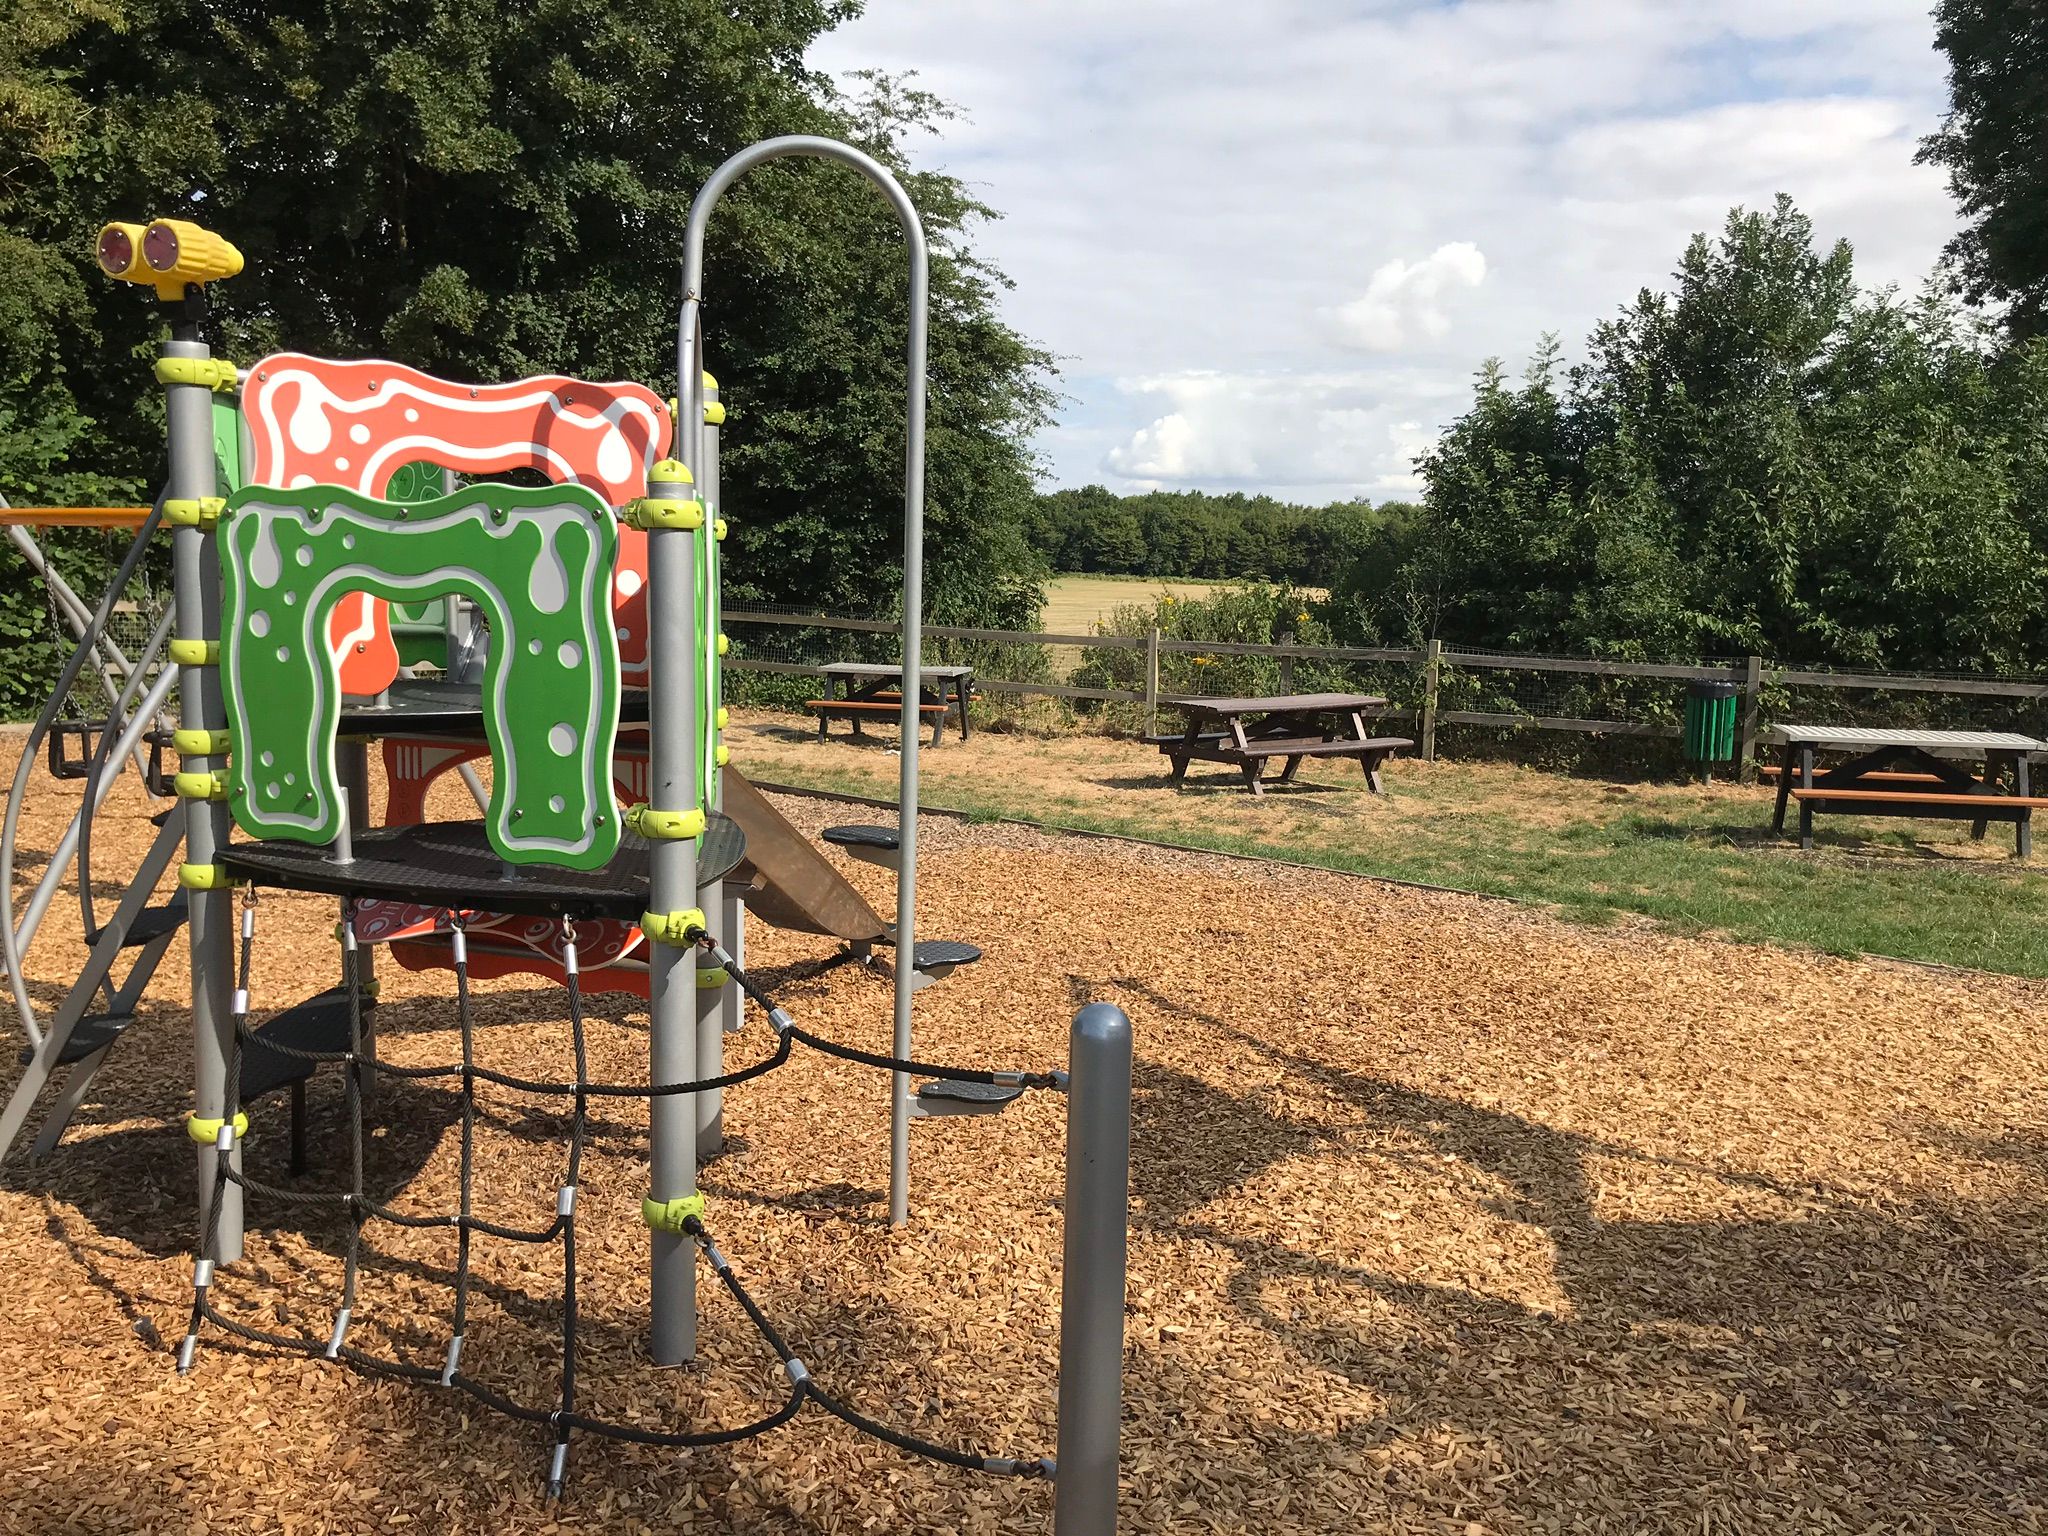 The smaller climbing frame and picnic benches at Lordswood play area